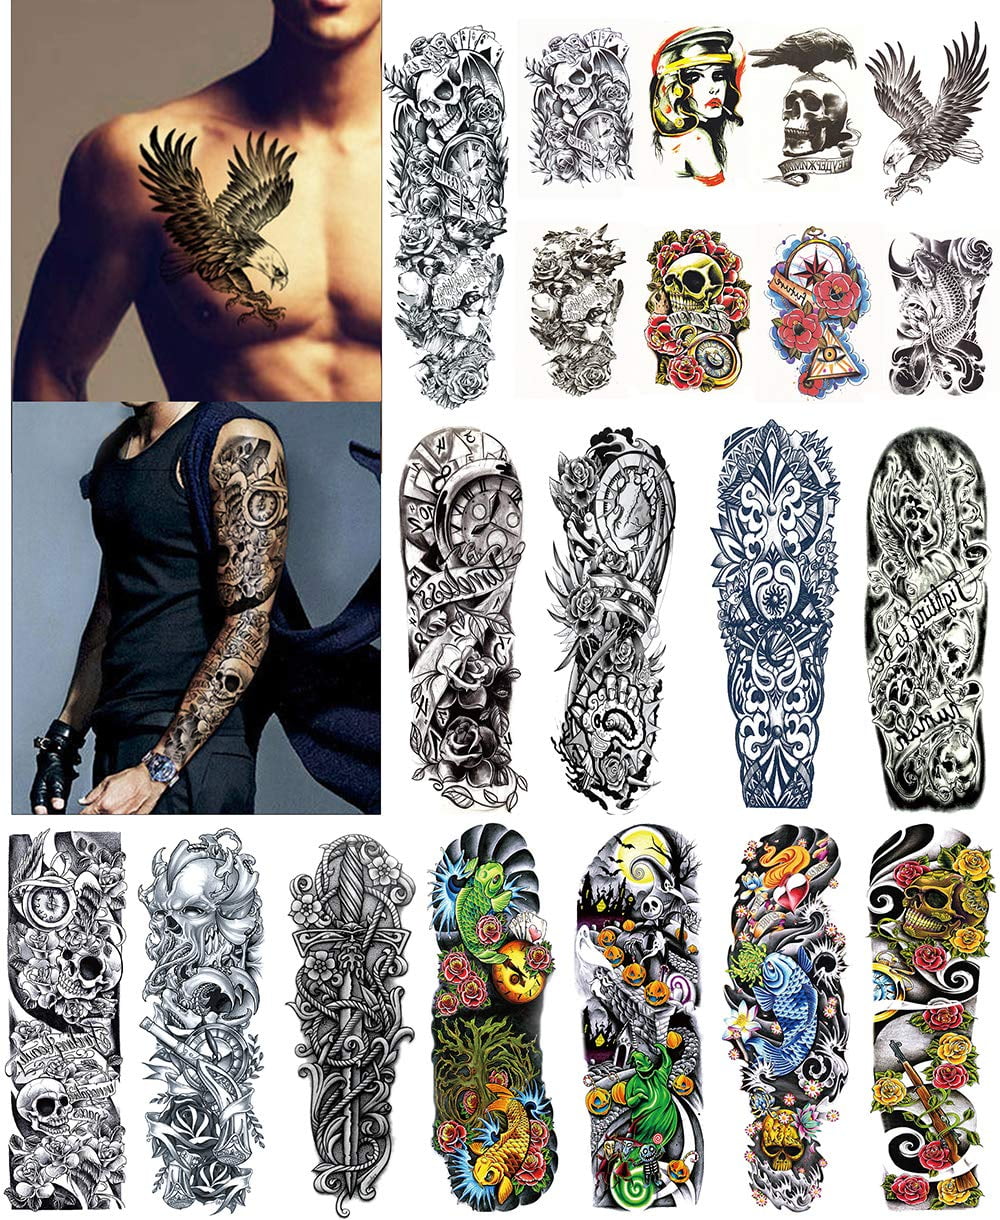 DaLin Extra Large Temporary Tattoos Full Arm and Half Arm Tattoo Sleeves for Men Women 20 Sheets